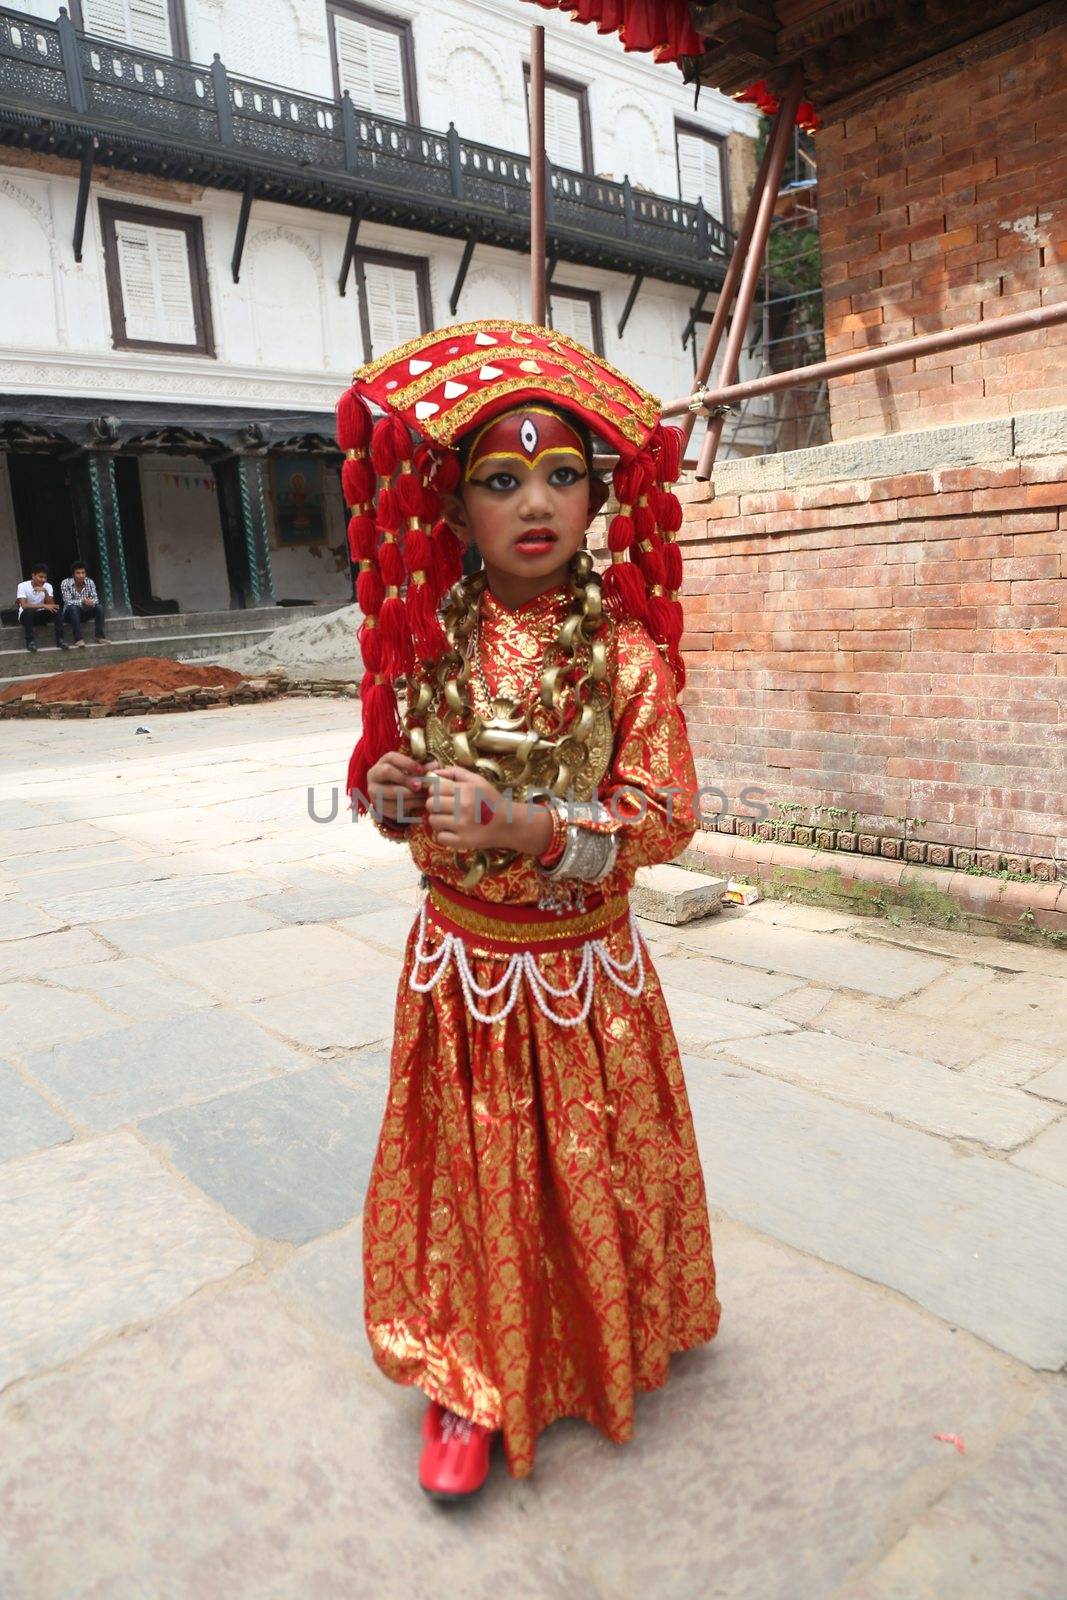 NEPAL, Kathmandu: Little girls are prepped for the procession of Kumari Puja, a ritual performed on the eighth day during Durga Puja, in Kathmandu, Nepal on September 26, 2015.The girls are considered as incarnation of Goddess Durga.